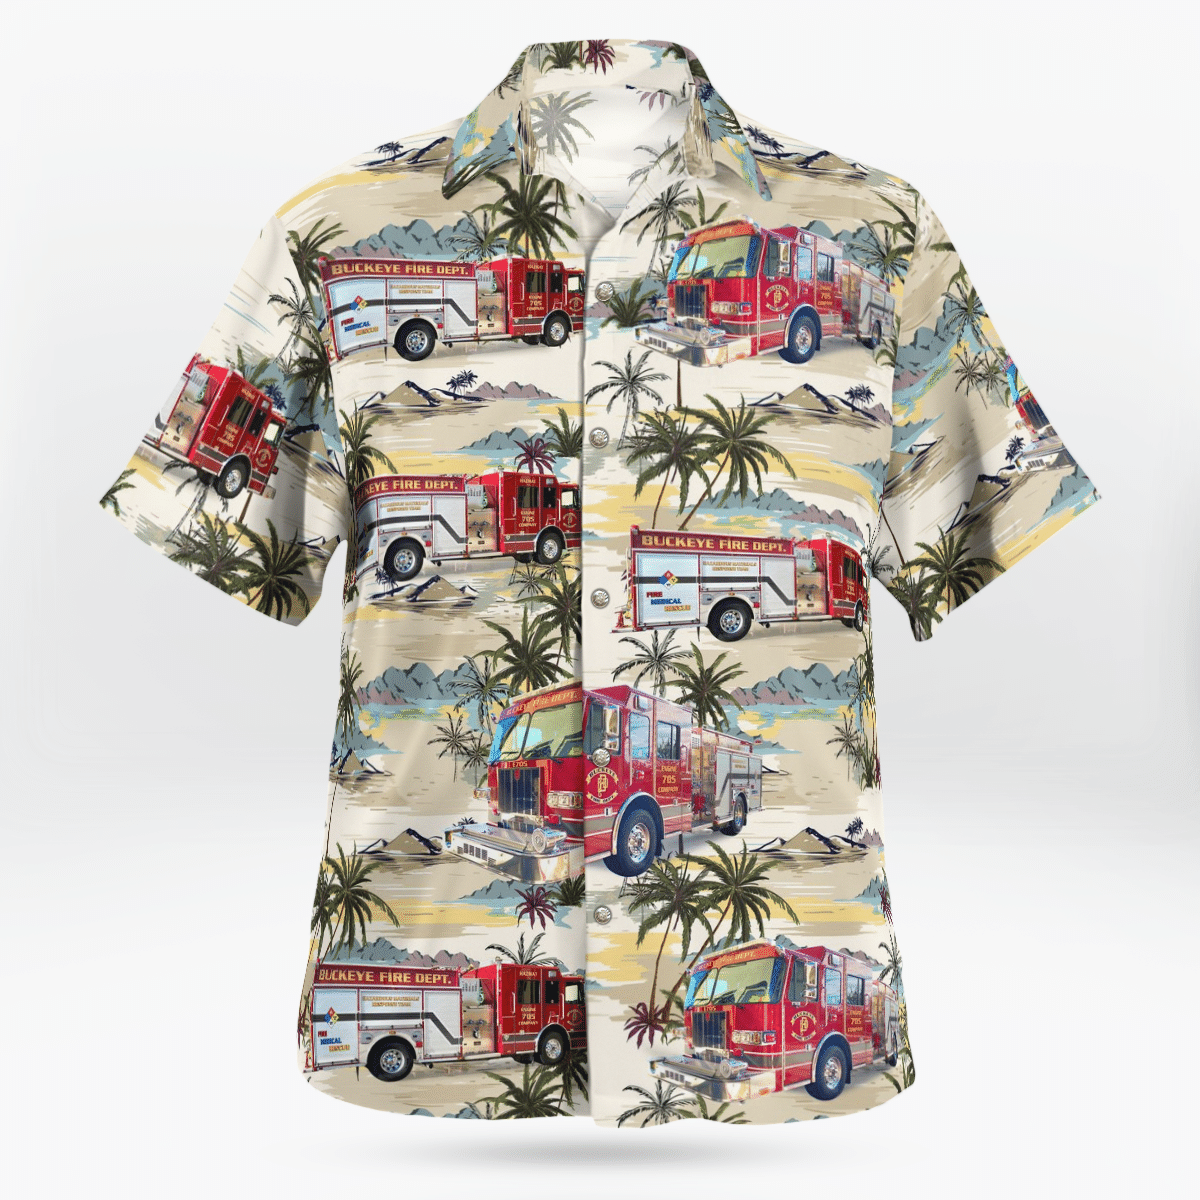 Hawaiian shirts never go out of style 163